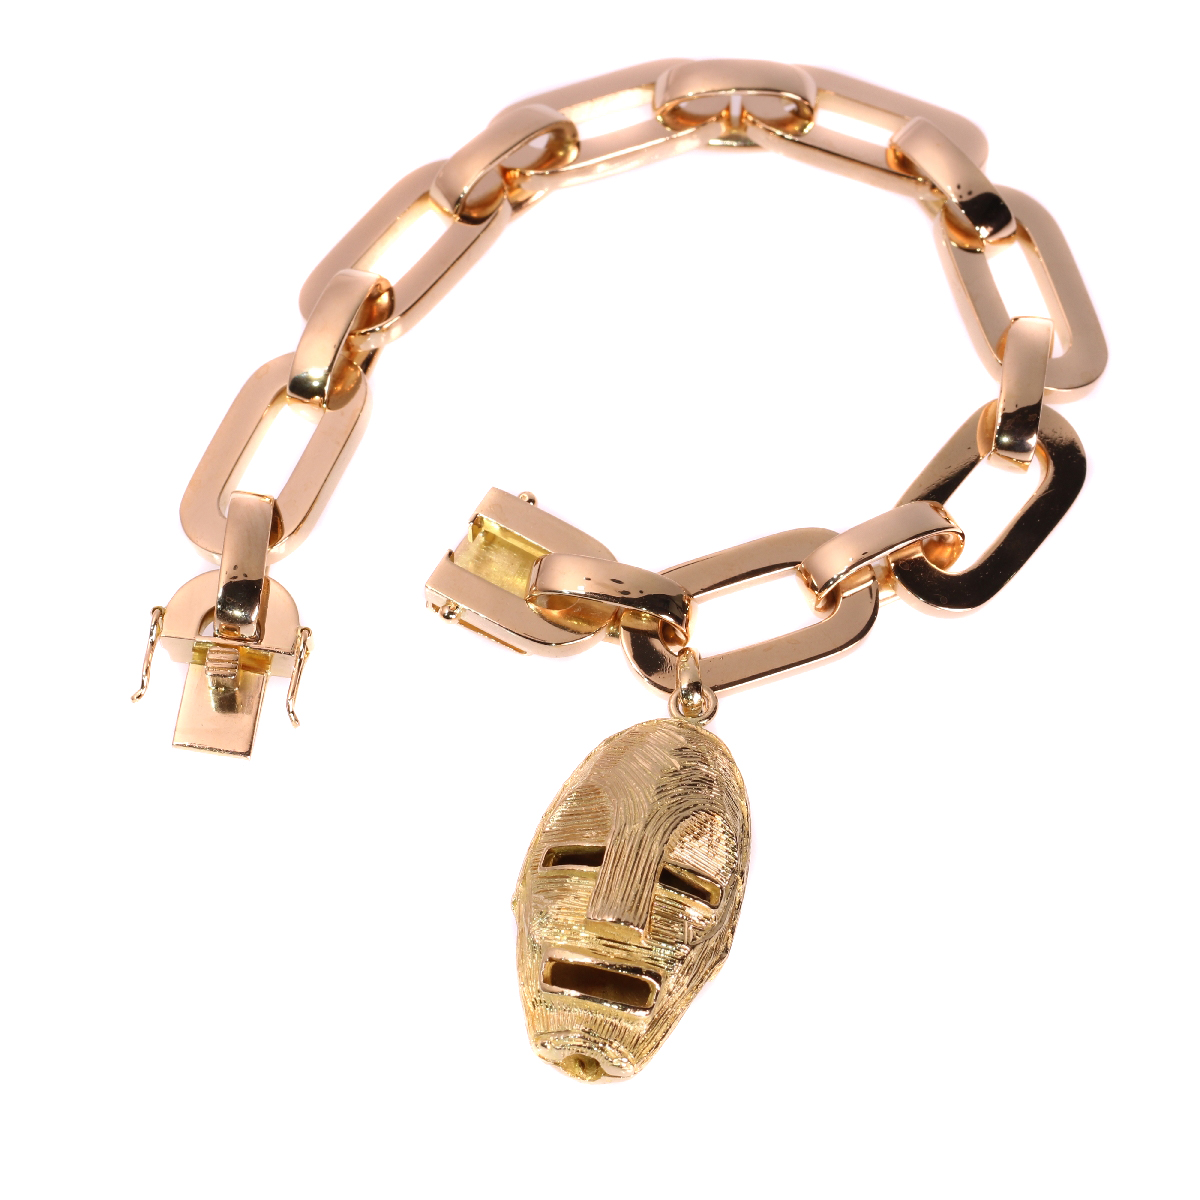 Vintage Fifties solid pink gold heavy bracelet with yellow gold ethnic african mask